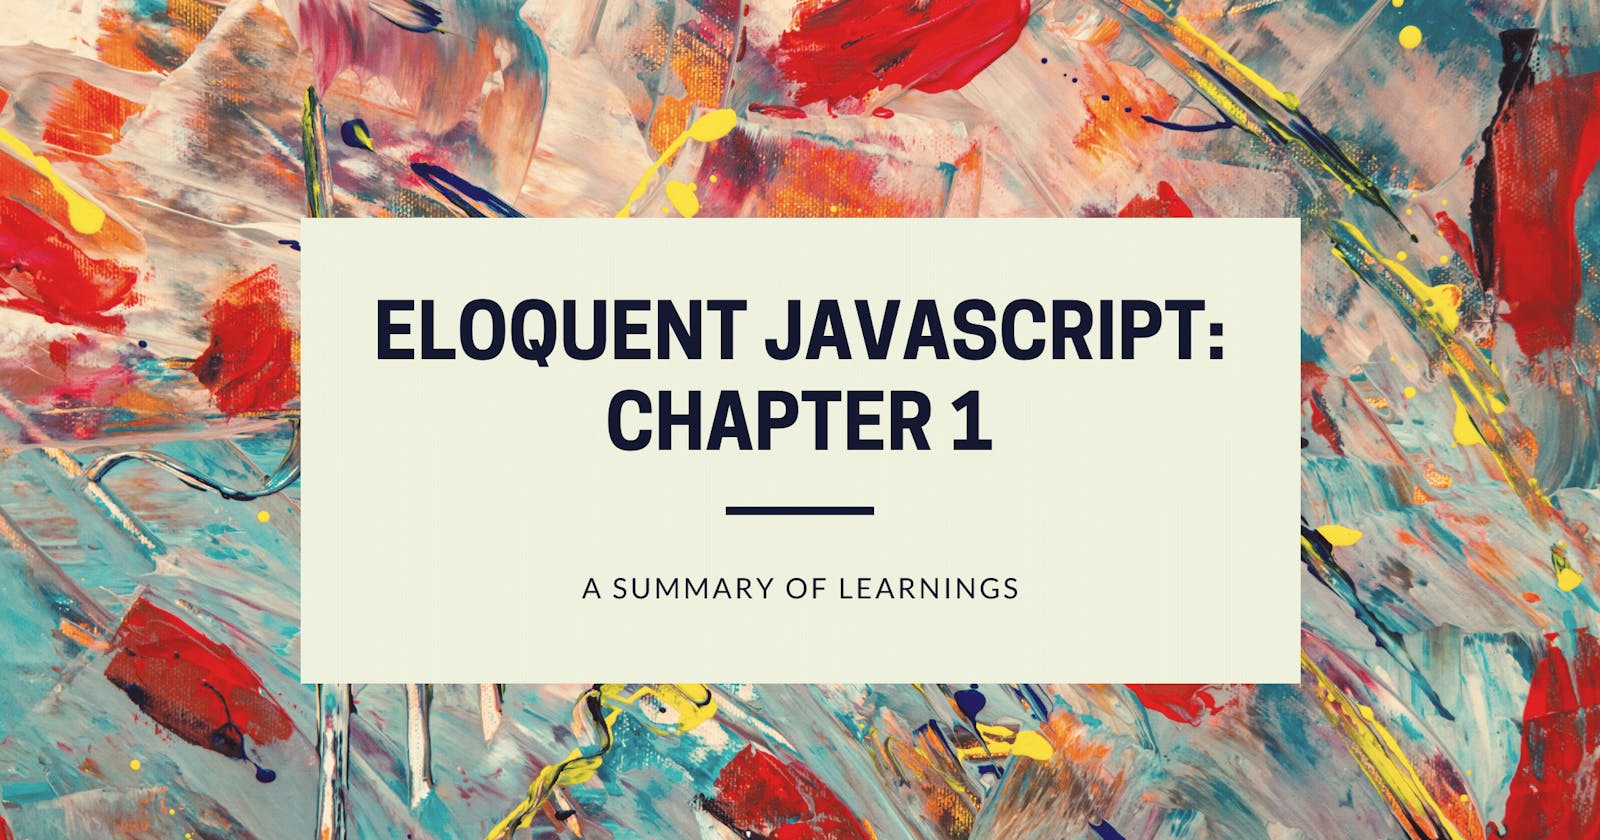 A Summary Of What I Learnt From The First Chapter of Eloquent Javascript.